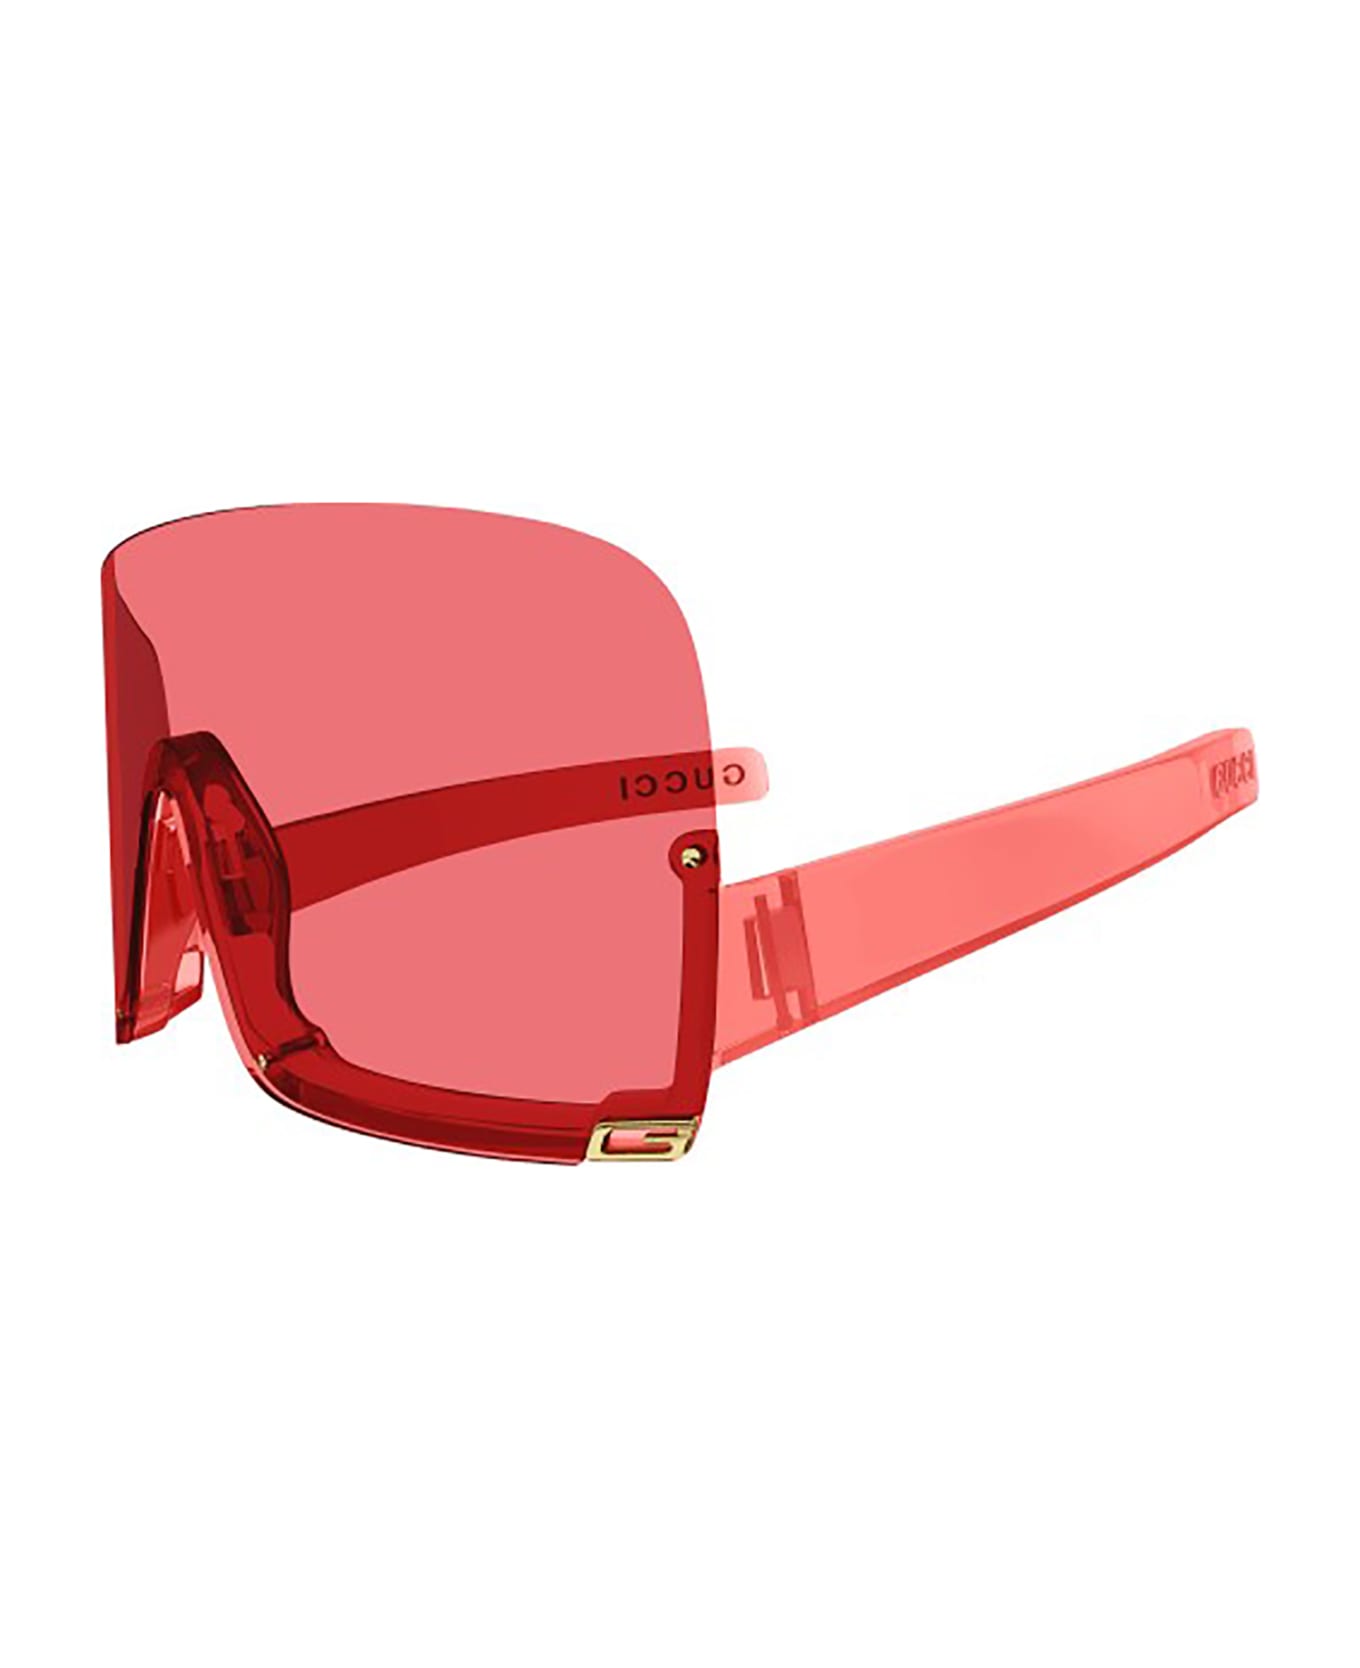 Gucci Eyewear GG1631S Sunglasses - Red Red Red サングラス